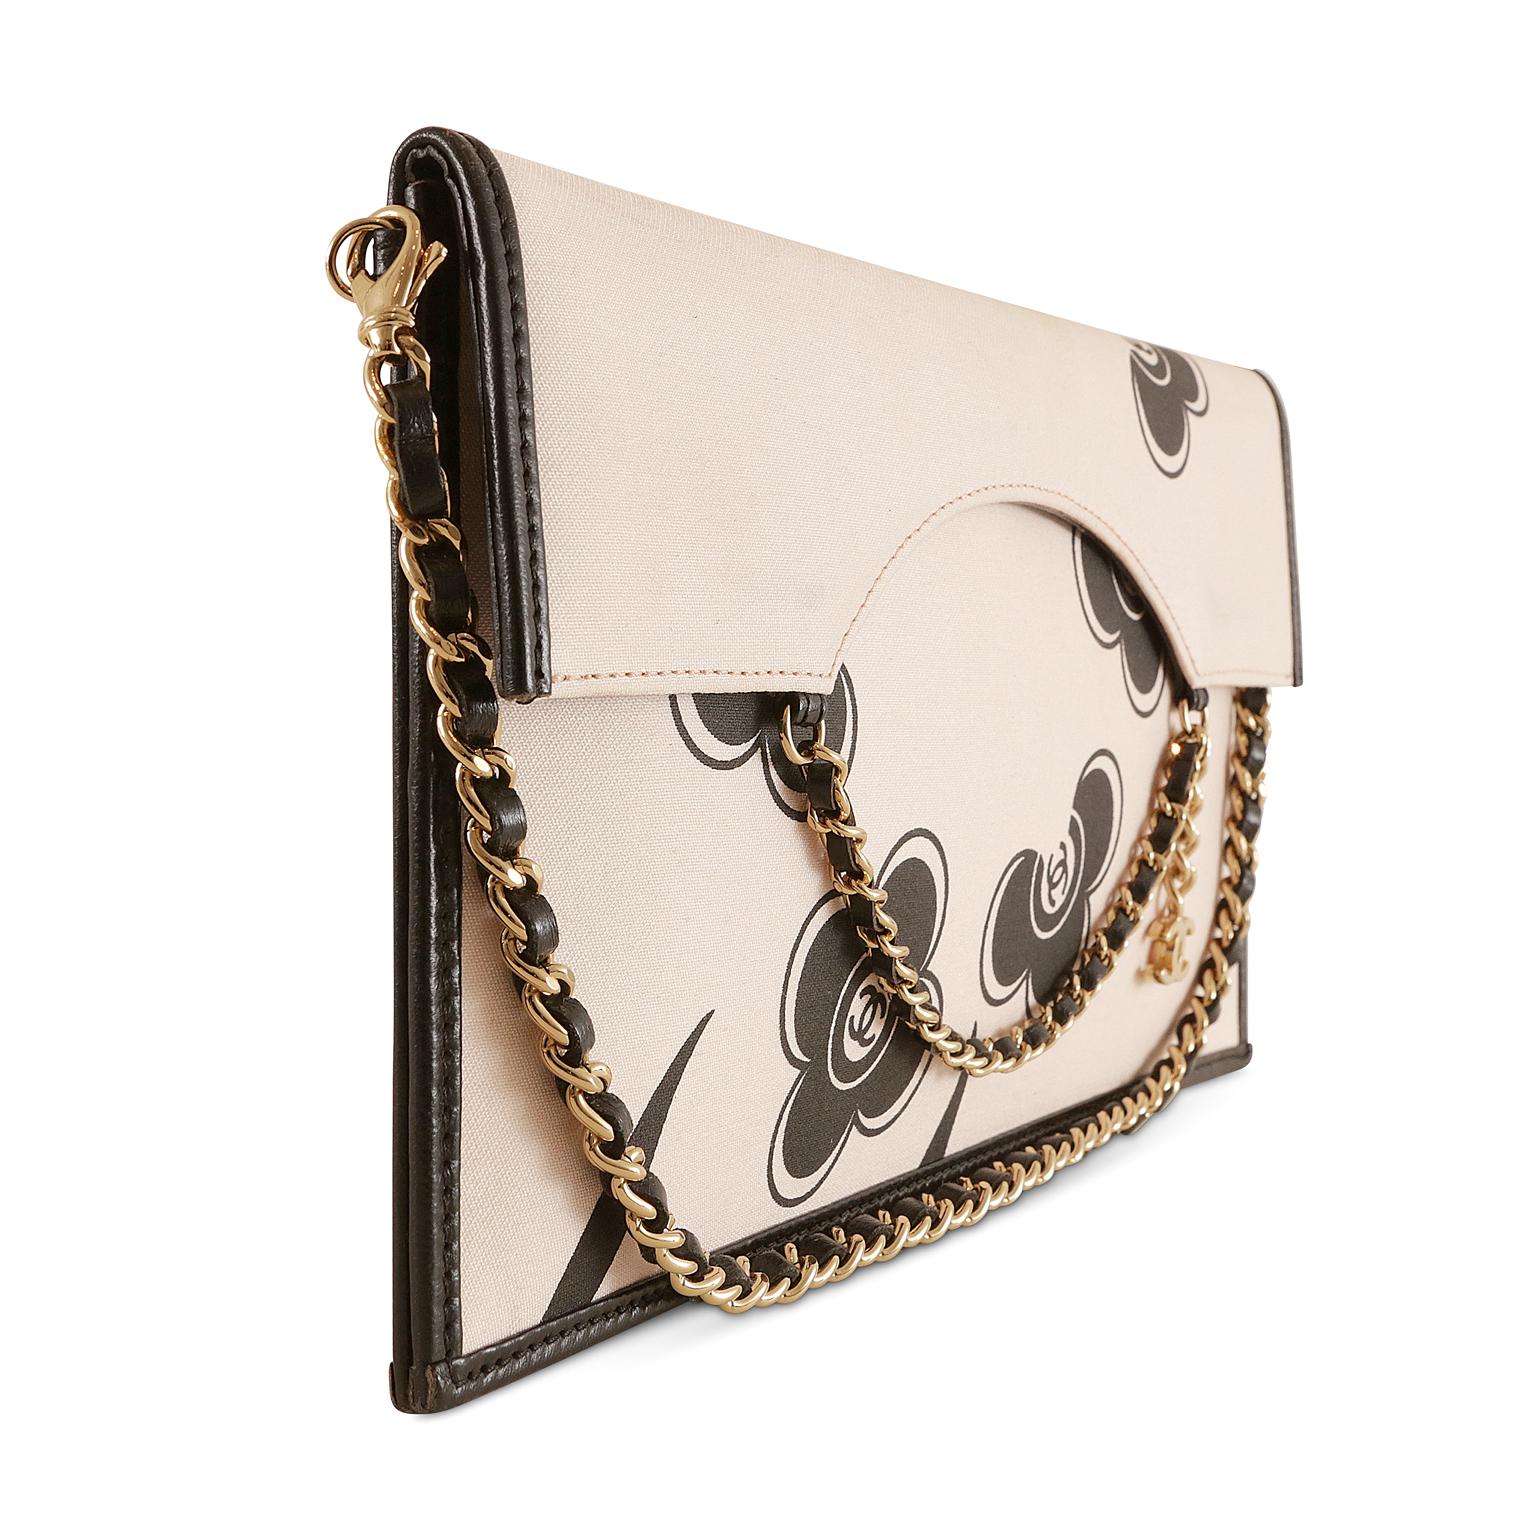 Chanel Camellia Silk and Leather Pochette- limited edition; excellent plus condition
 A removable strap enhances the versatility- it may be carried as a clutch or shoulder bag.  
Cream silk slim flap bag is edged with sturdy black leather.  Adorned